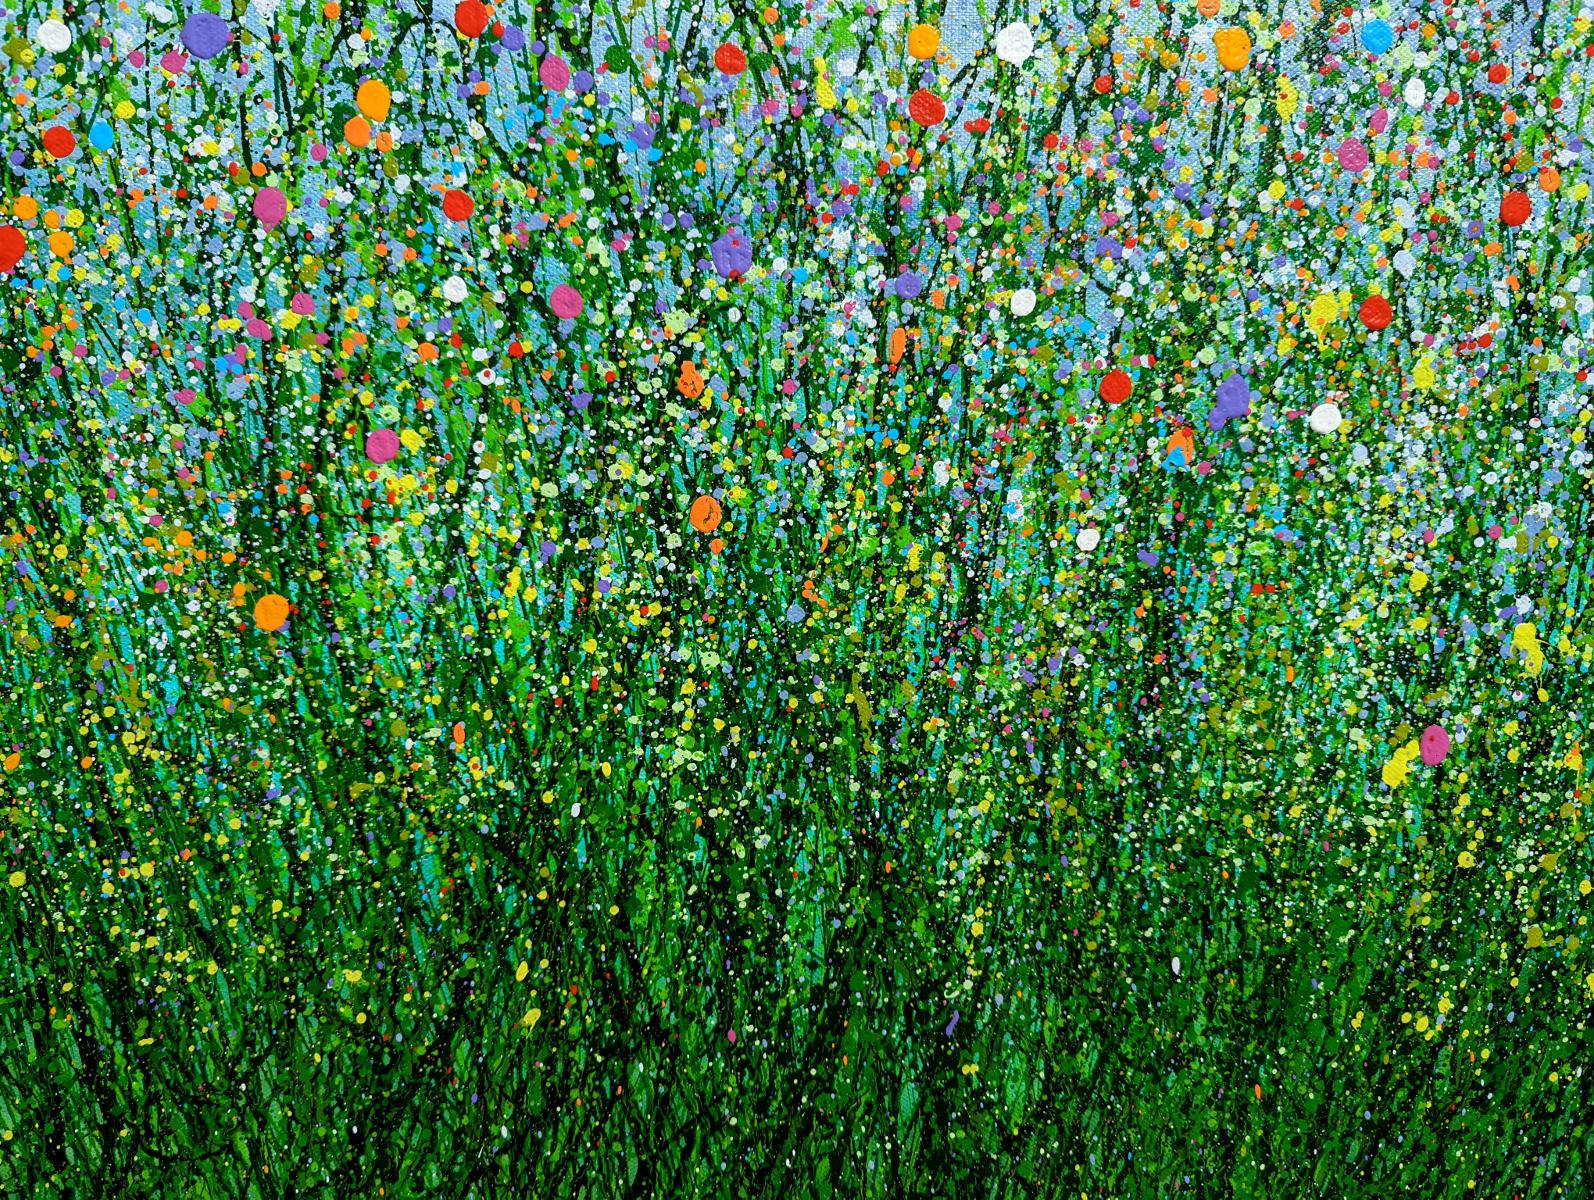 After The Rain #5 – By Lucy Moore [2022]

original
Acrylic on canvas
Image size: H:76 cm x W:76 cm
Complete Size of Unframed Work: H:76 cm x W:76 cm x D:1.5cm
Sold Unframed
Please note that insitu images are purely an indication of how a piece may